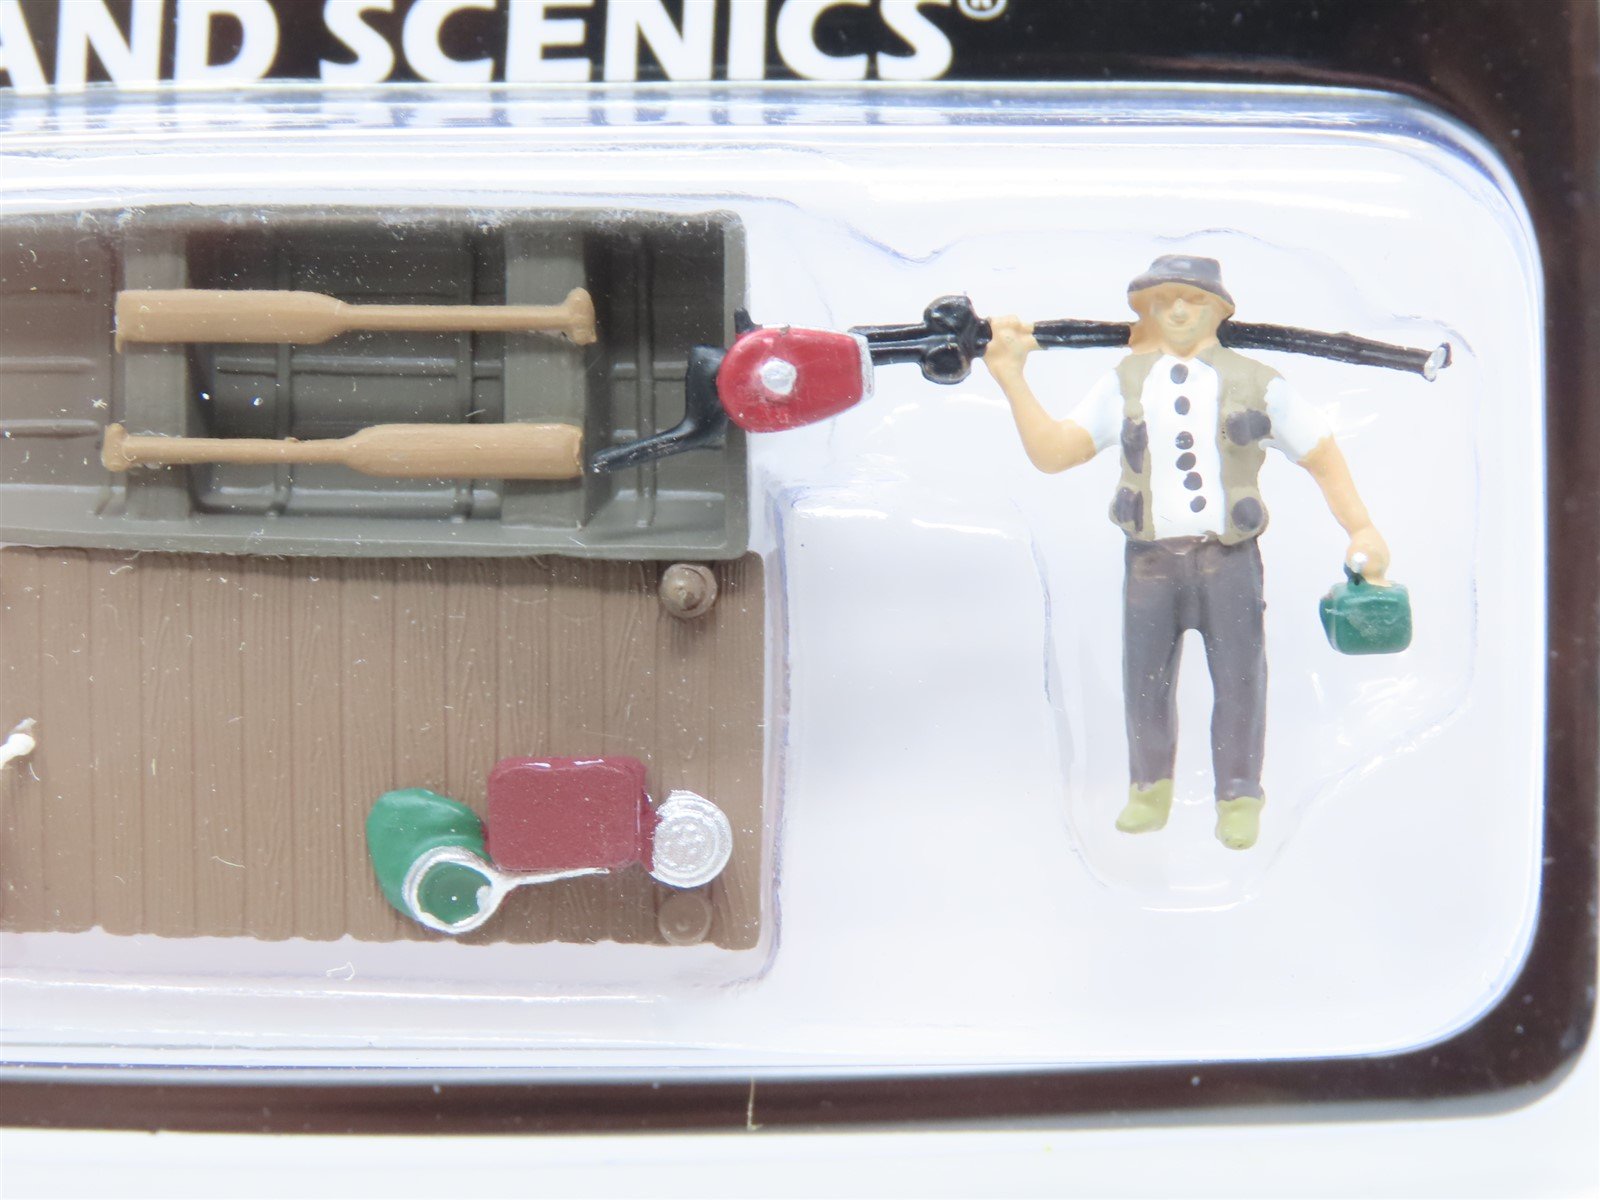  Woodland Scenics Gone Fishing HO Scale : Arts, Crafts & Sewing